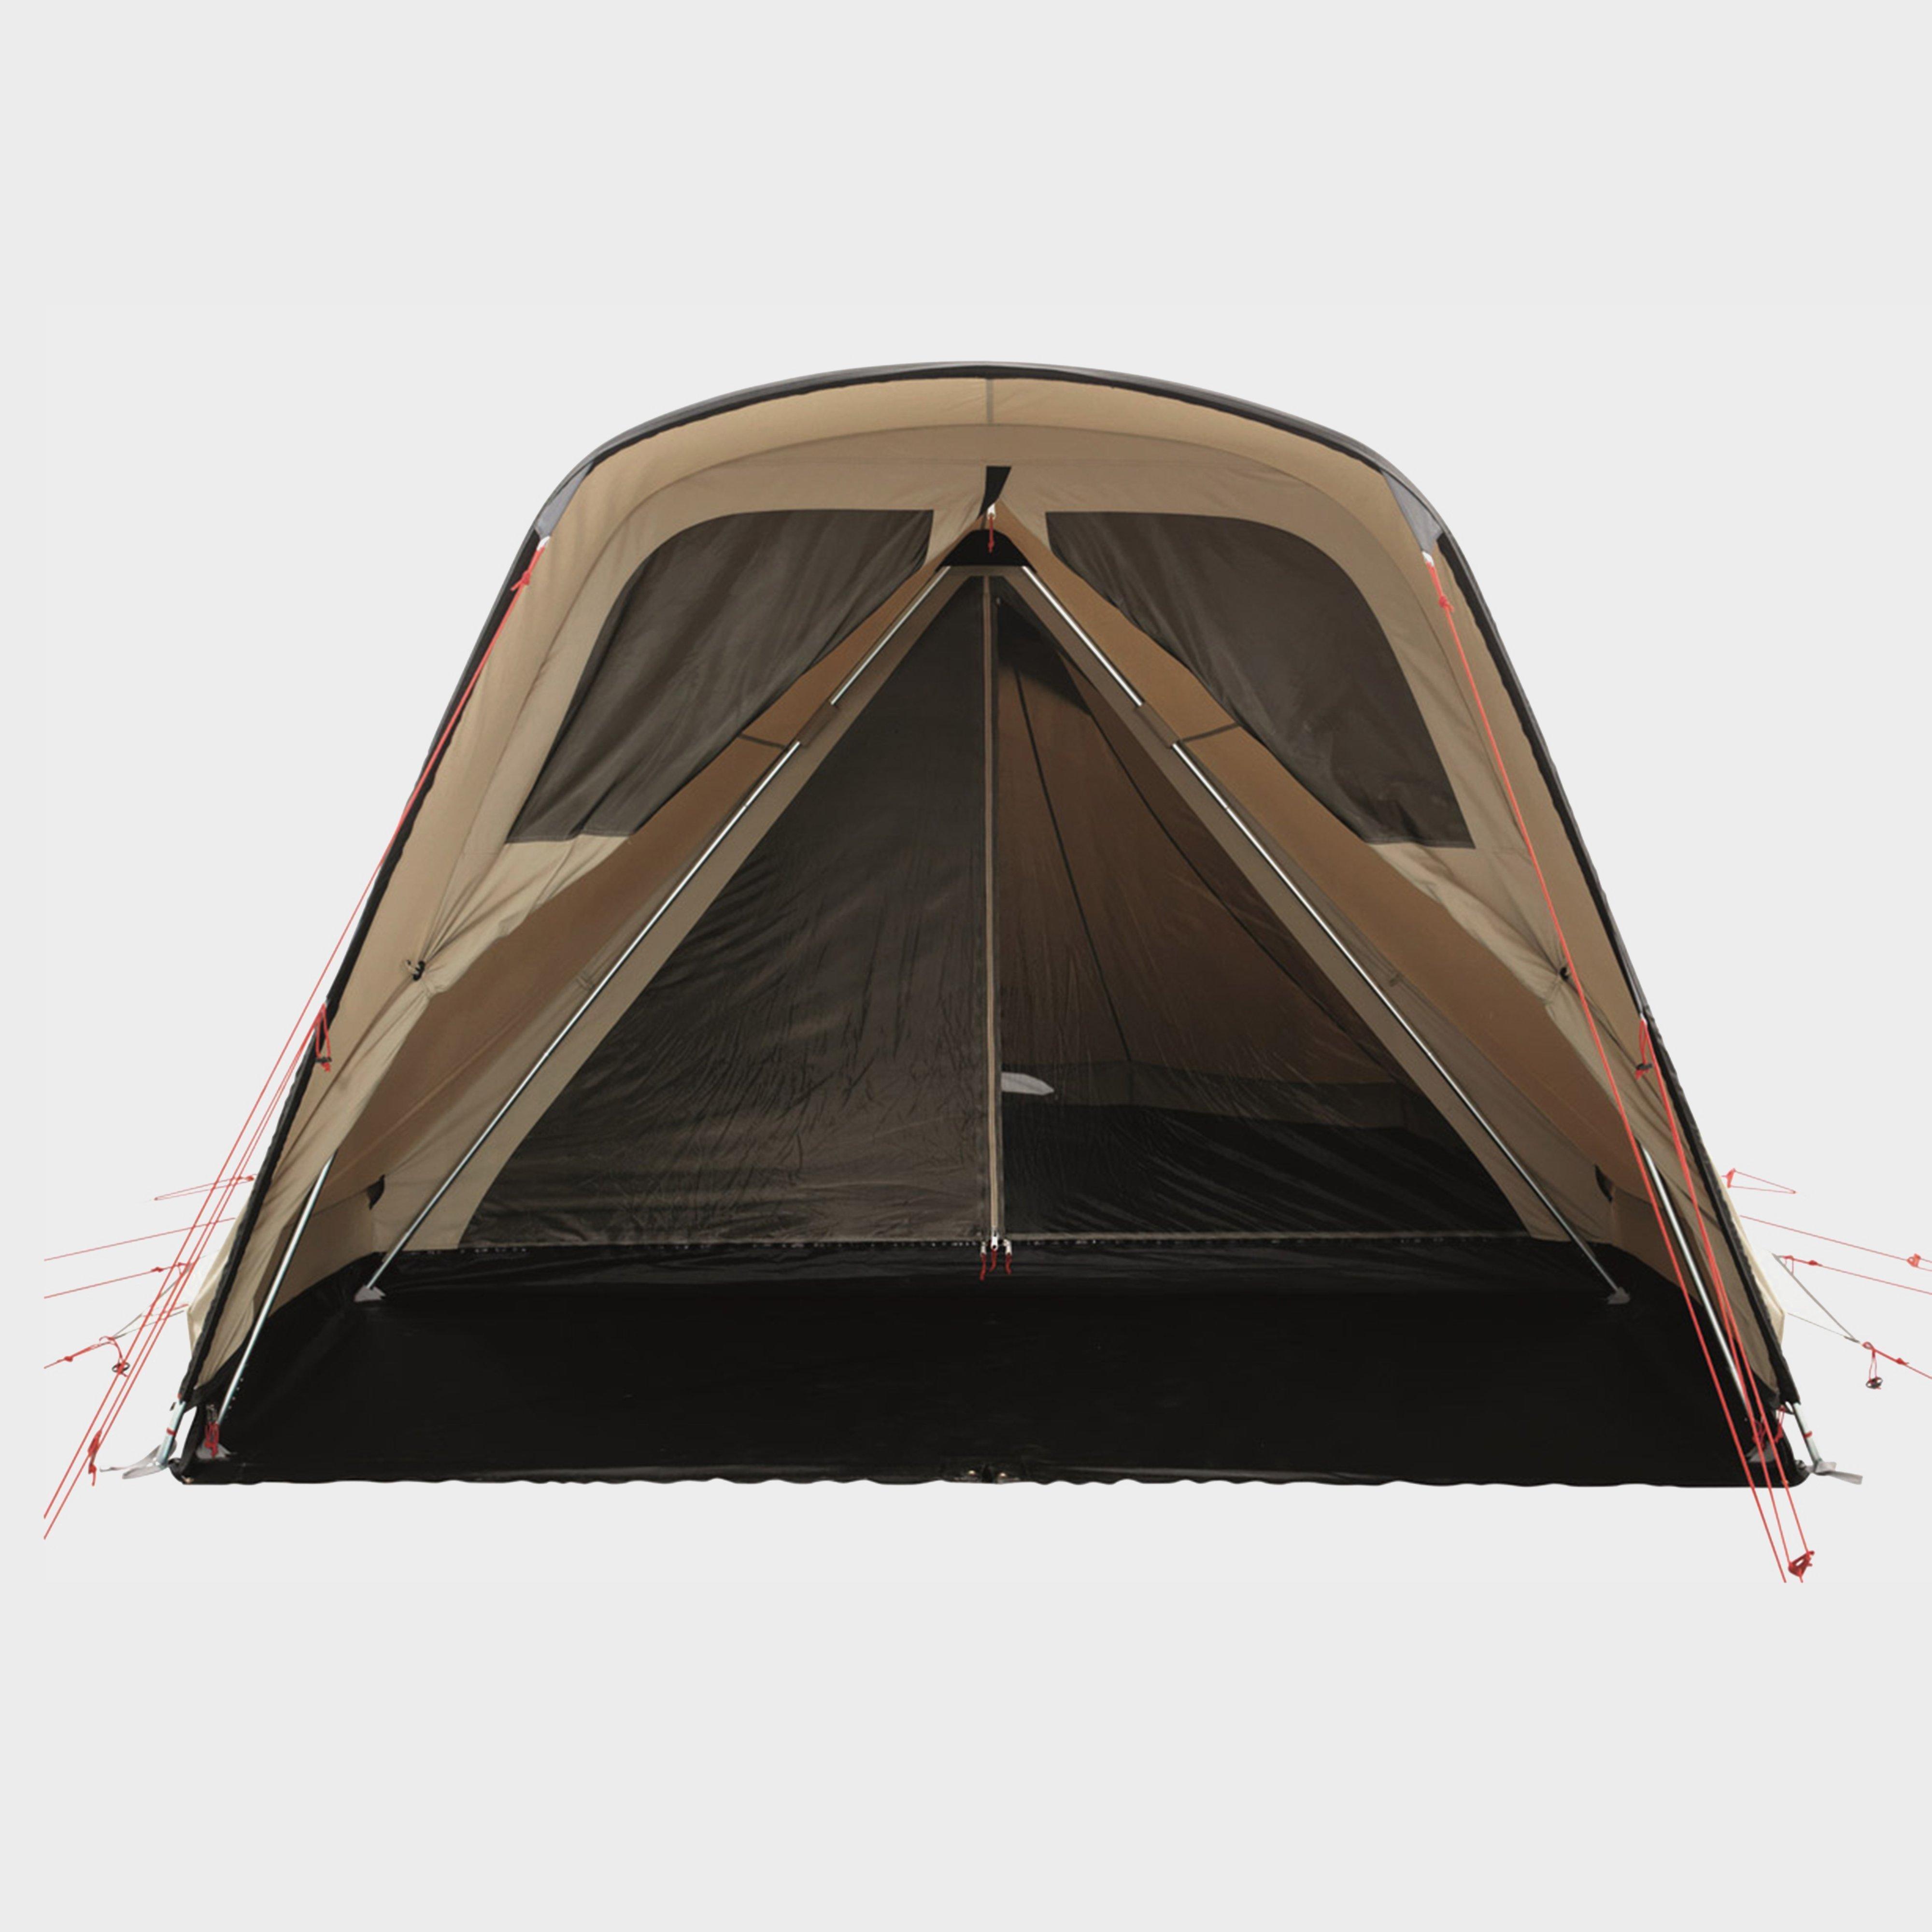 Robens Trapper 4 Person Tent Review